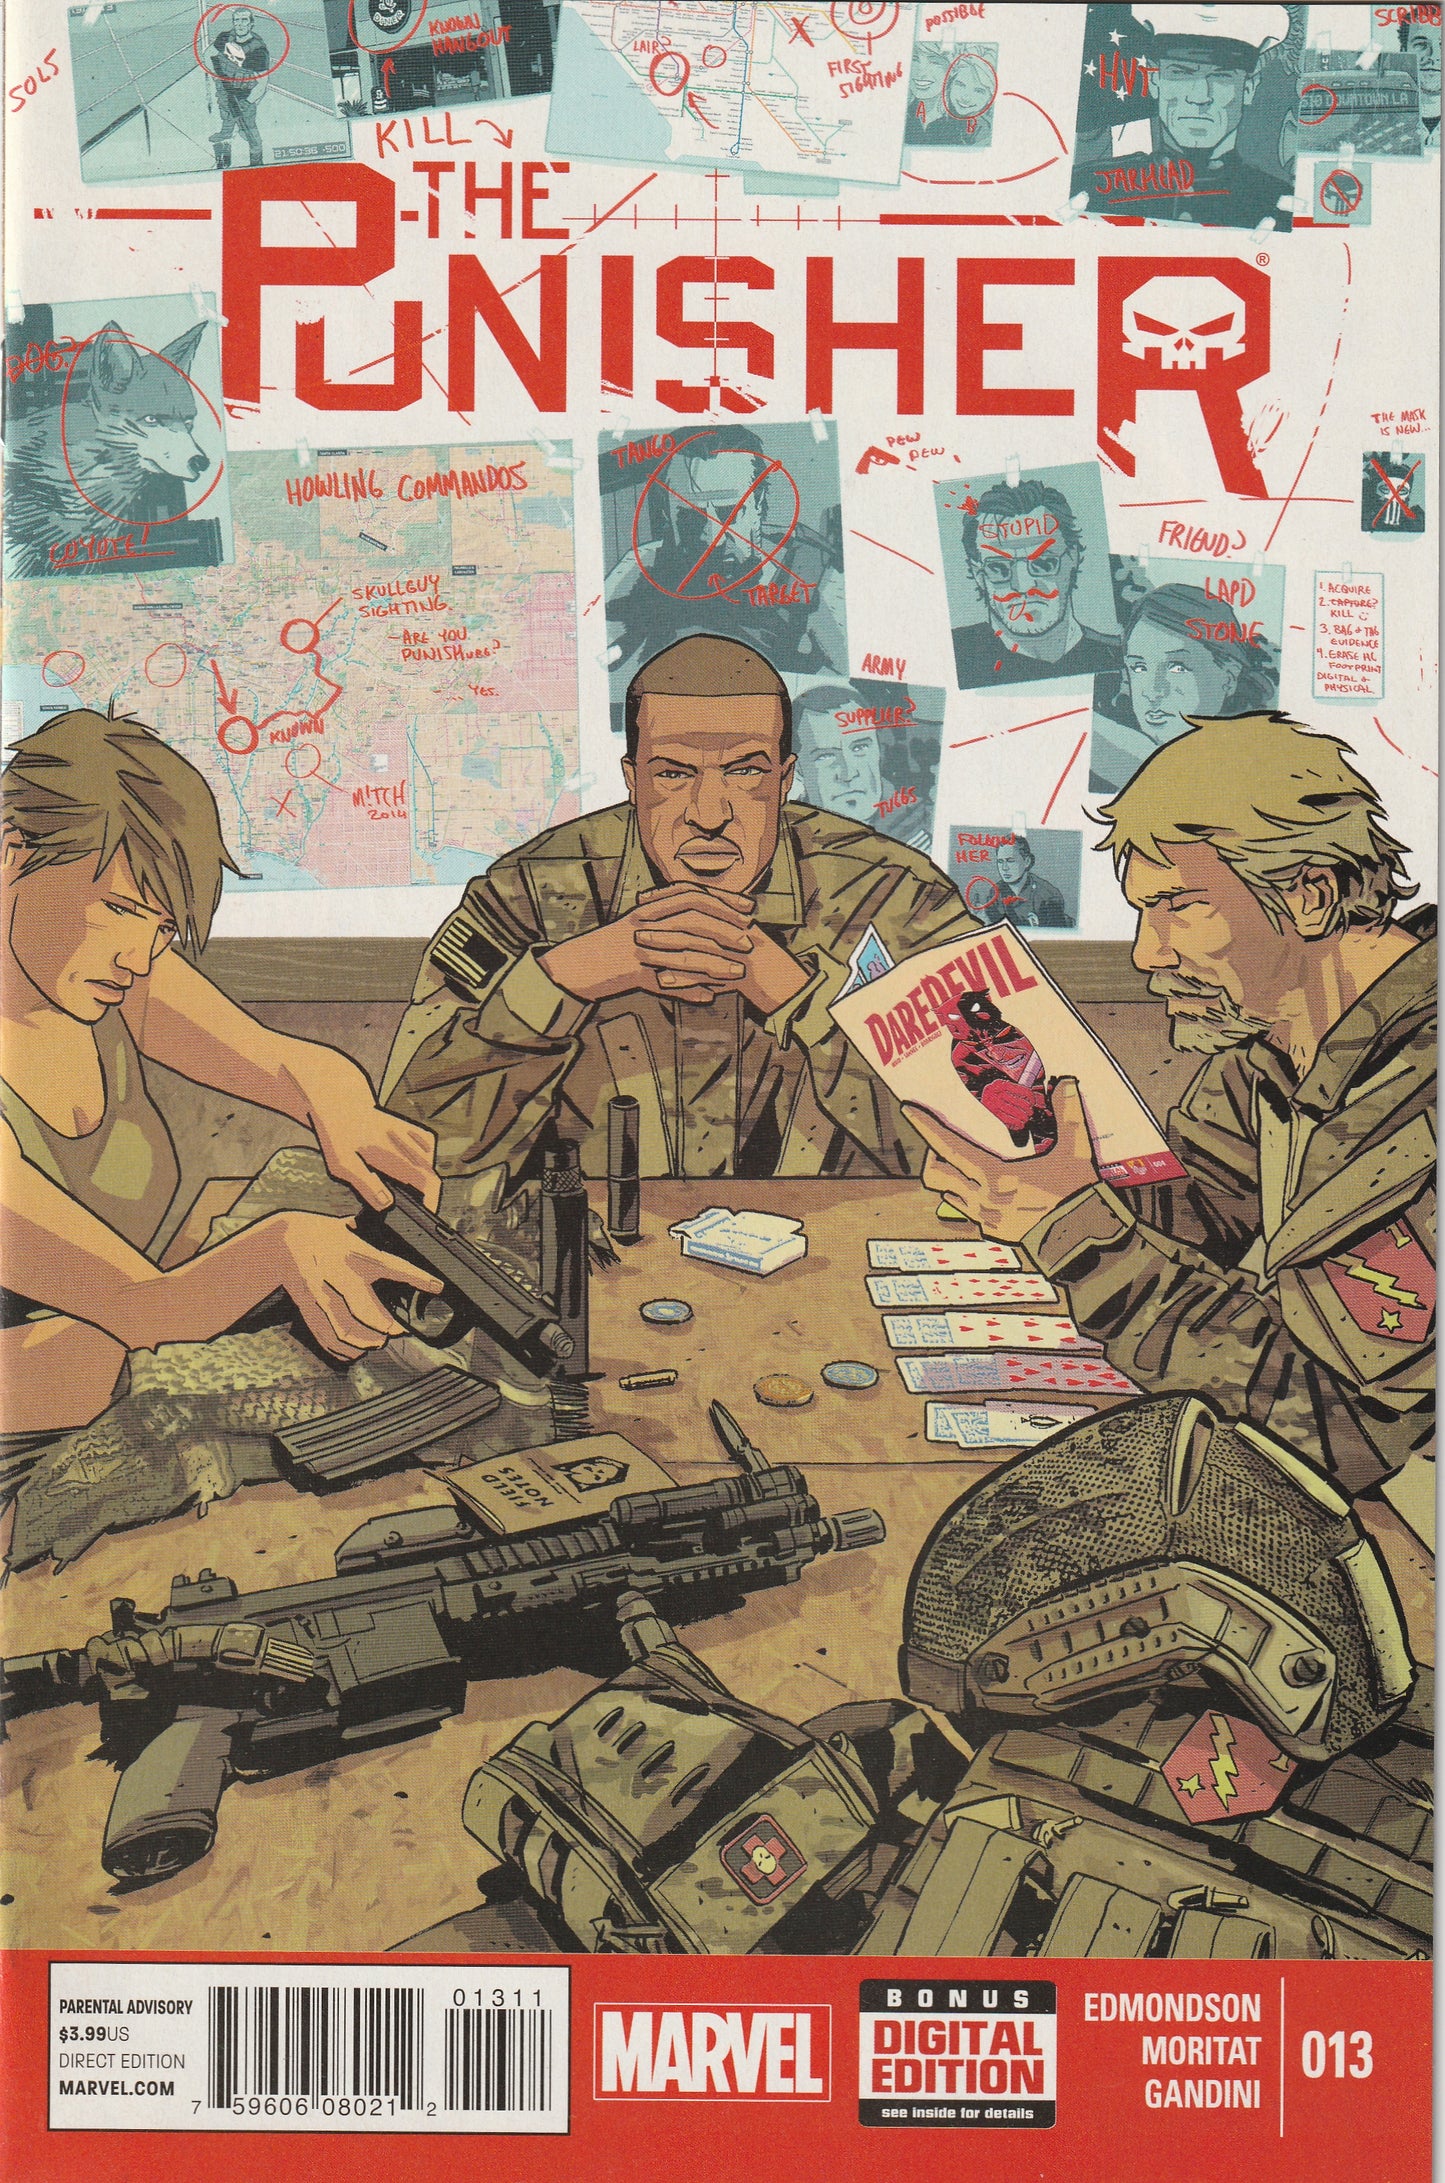 The Punisher #13 (NOW, 2015)